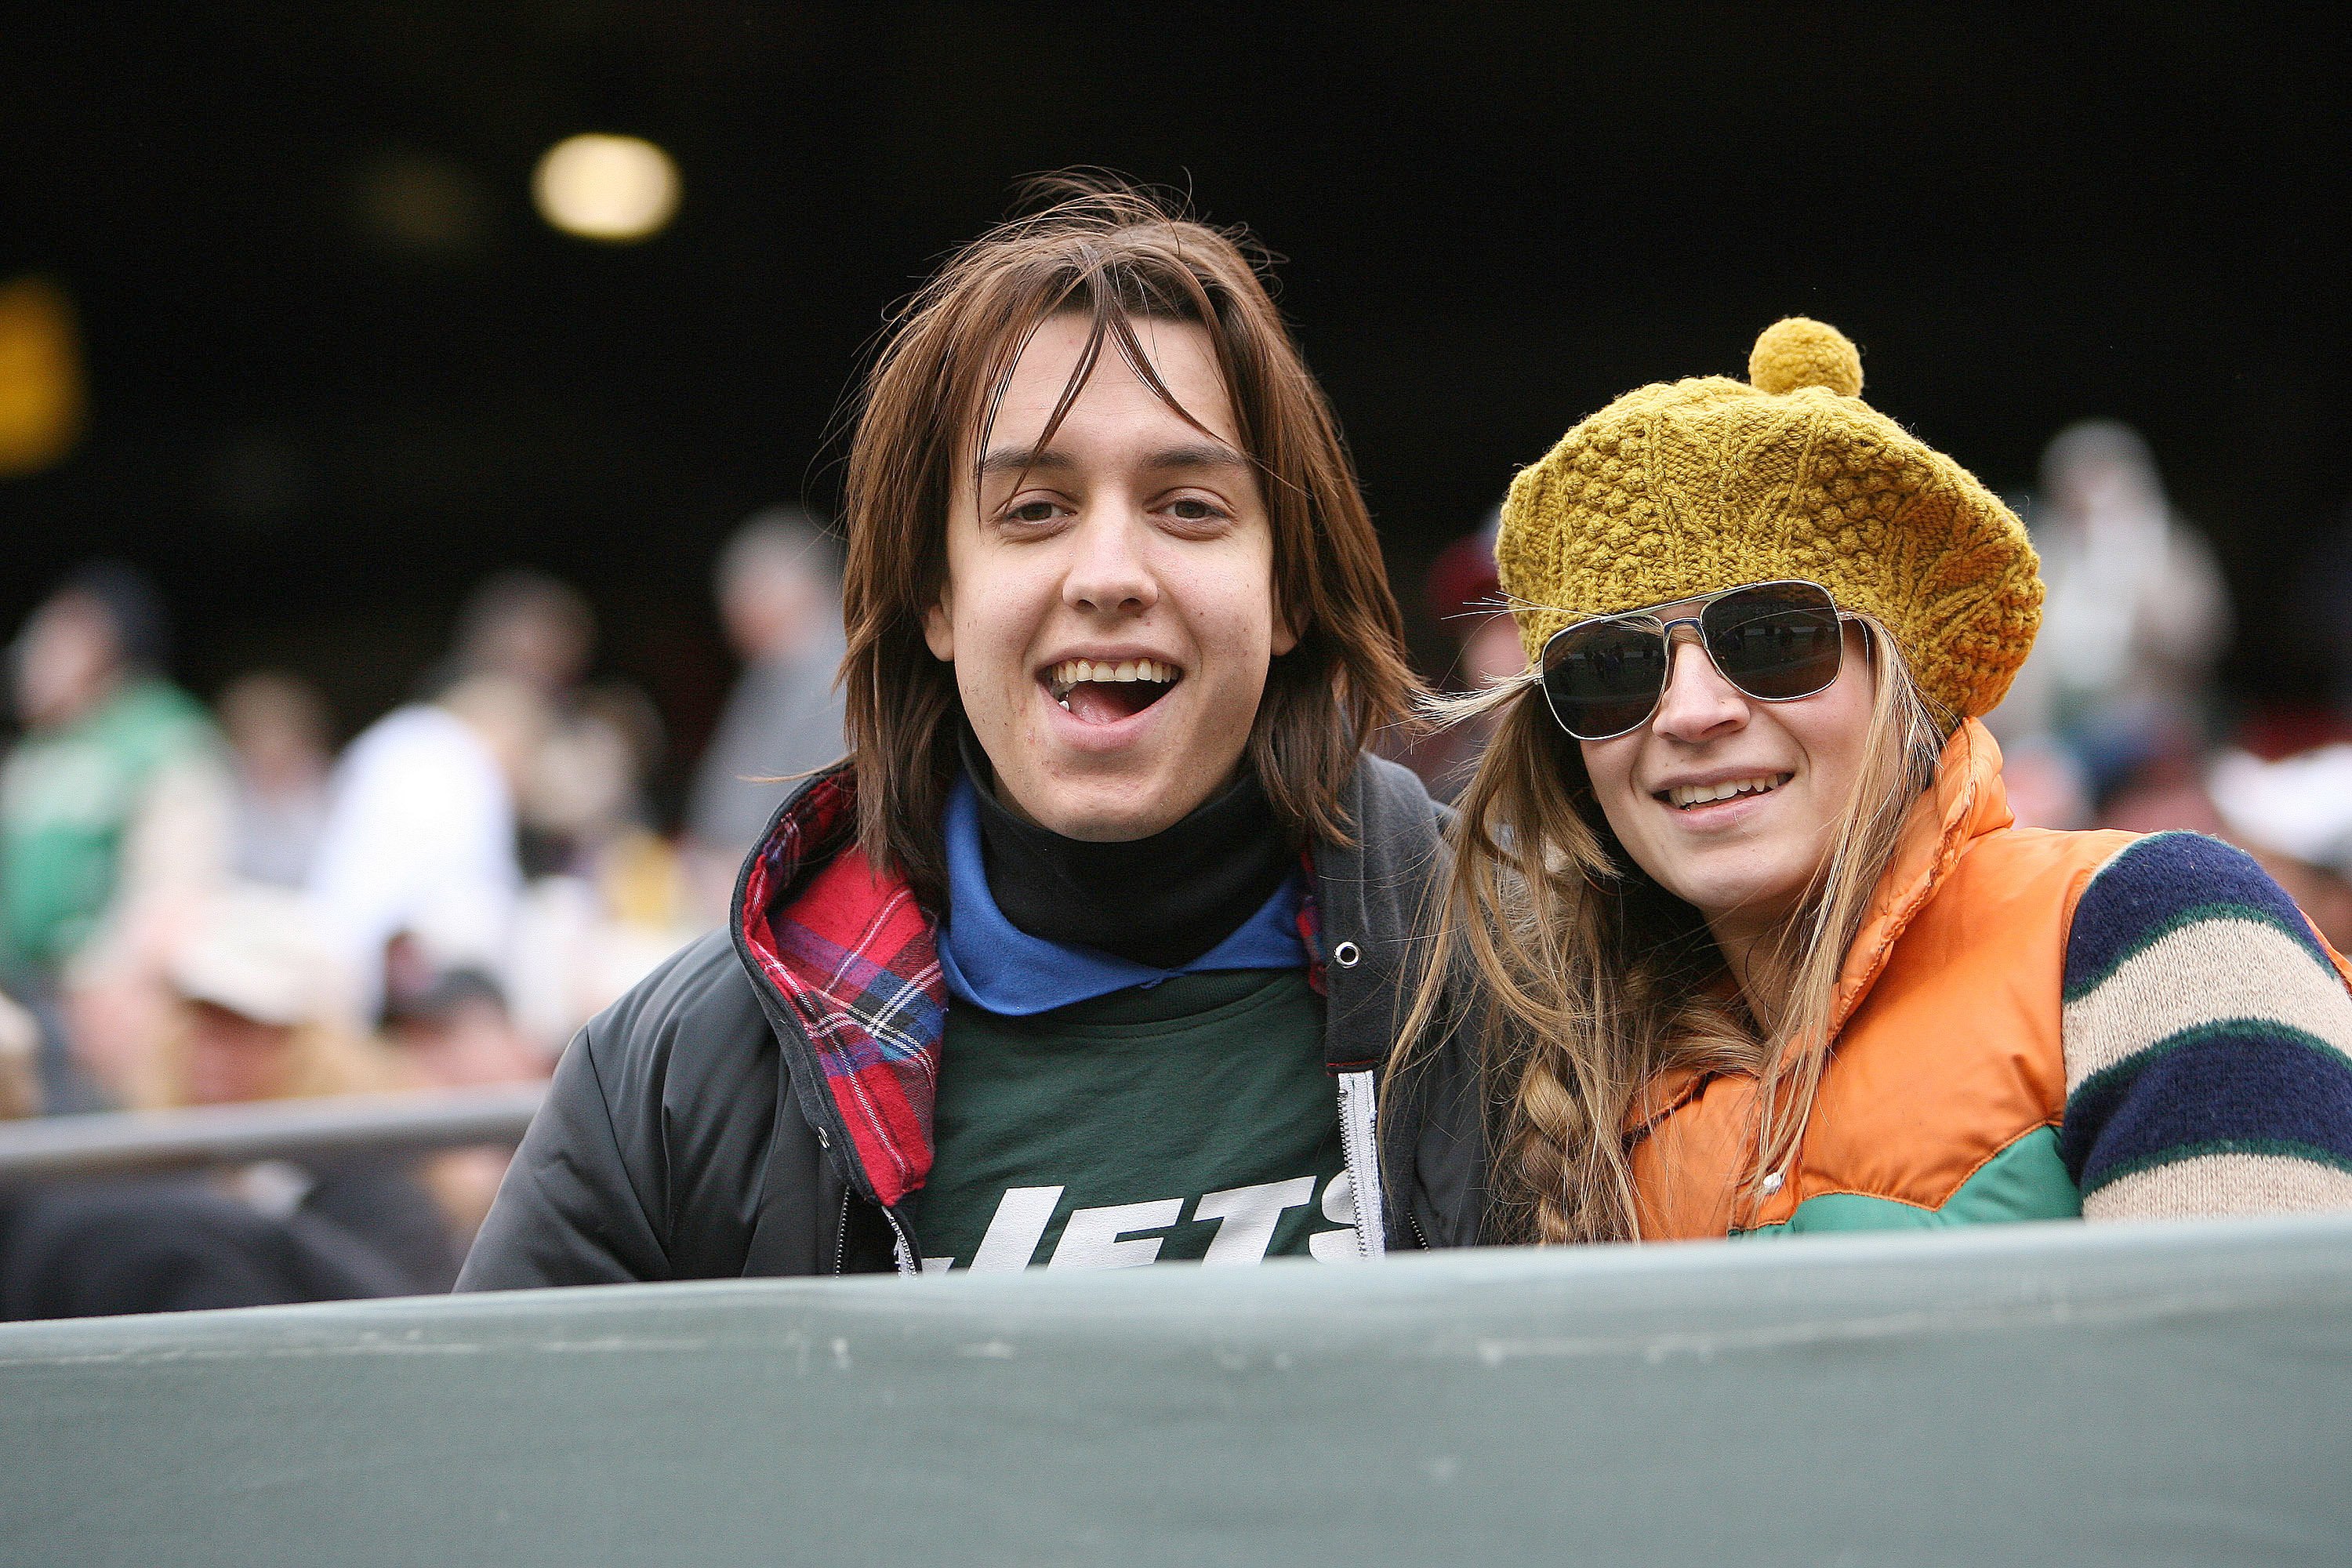 Julian Casablancas and his ex-wife, Juliet Juslin, at a Chicago Bears and New York Jets match at the Meadowlands in New Jersey on November 19, 2006.  | Source: Getty Images 